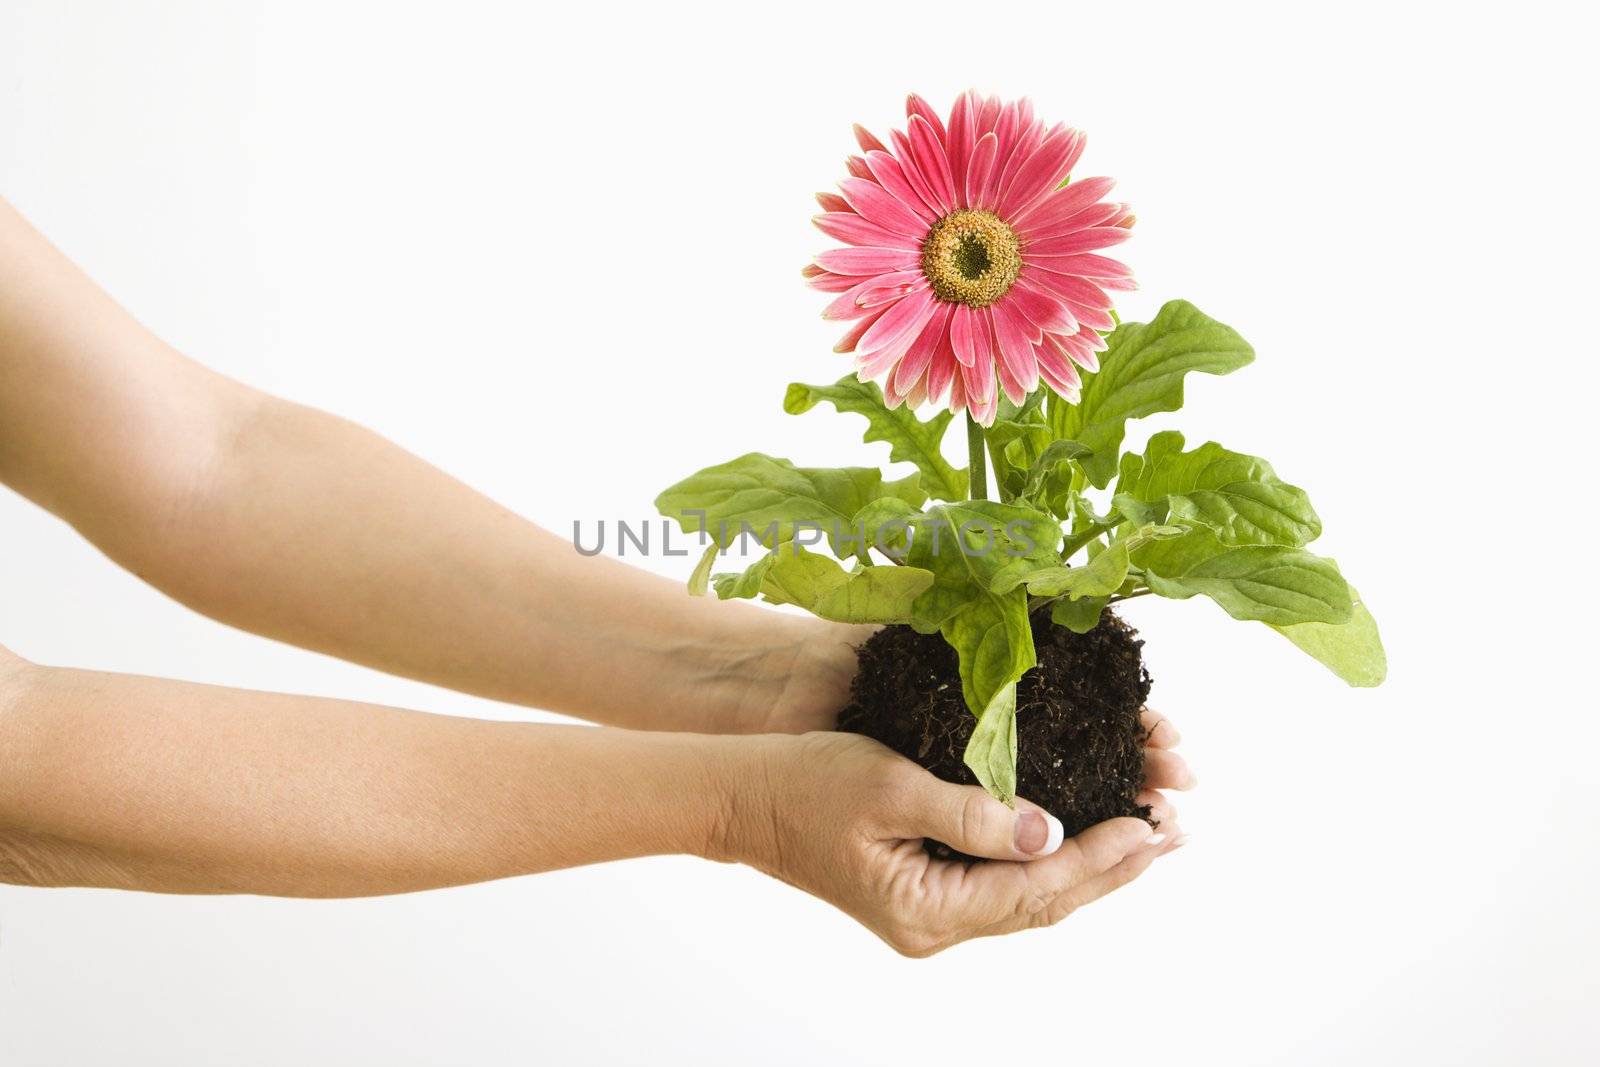 Woman's hand holding pink gerber daisy plant.